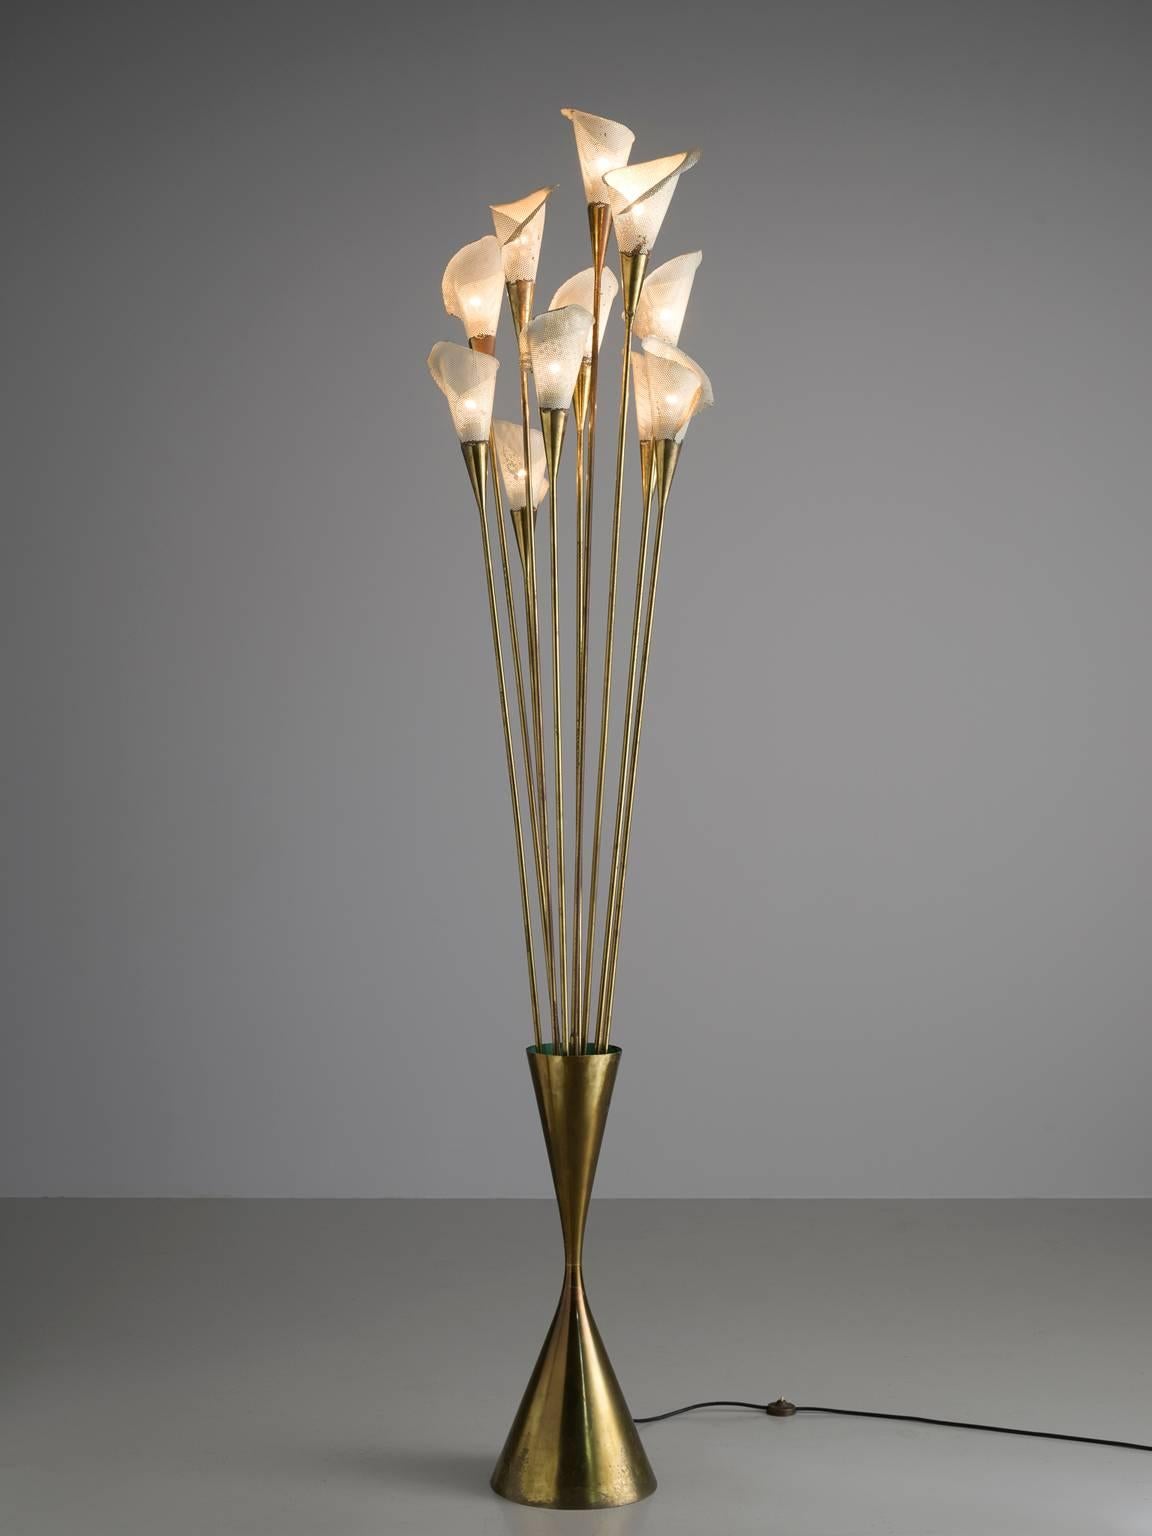 'Calla' floor lamp, in brass and metal by Angelo Lelli for Arredoluce, Italy, 1950s.

This unique item consist out of a bouquet of 11 lilies, hold together by an hour glass shaped brass base. The sharp line of the base created a stunning contrast